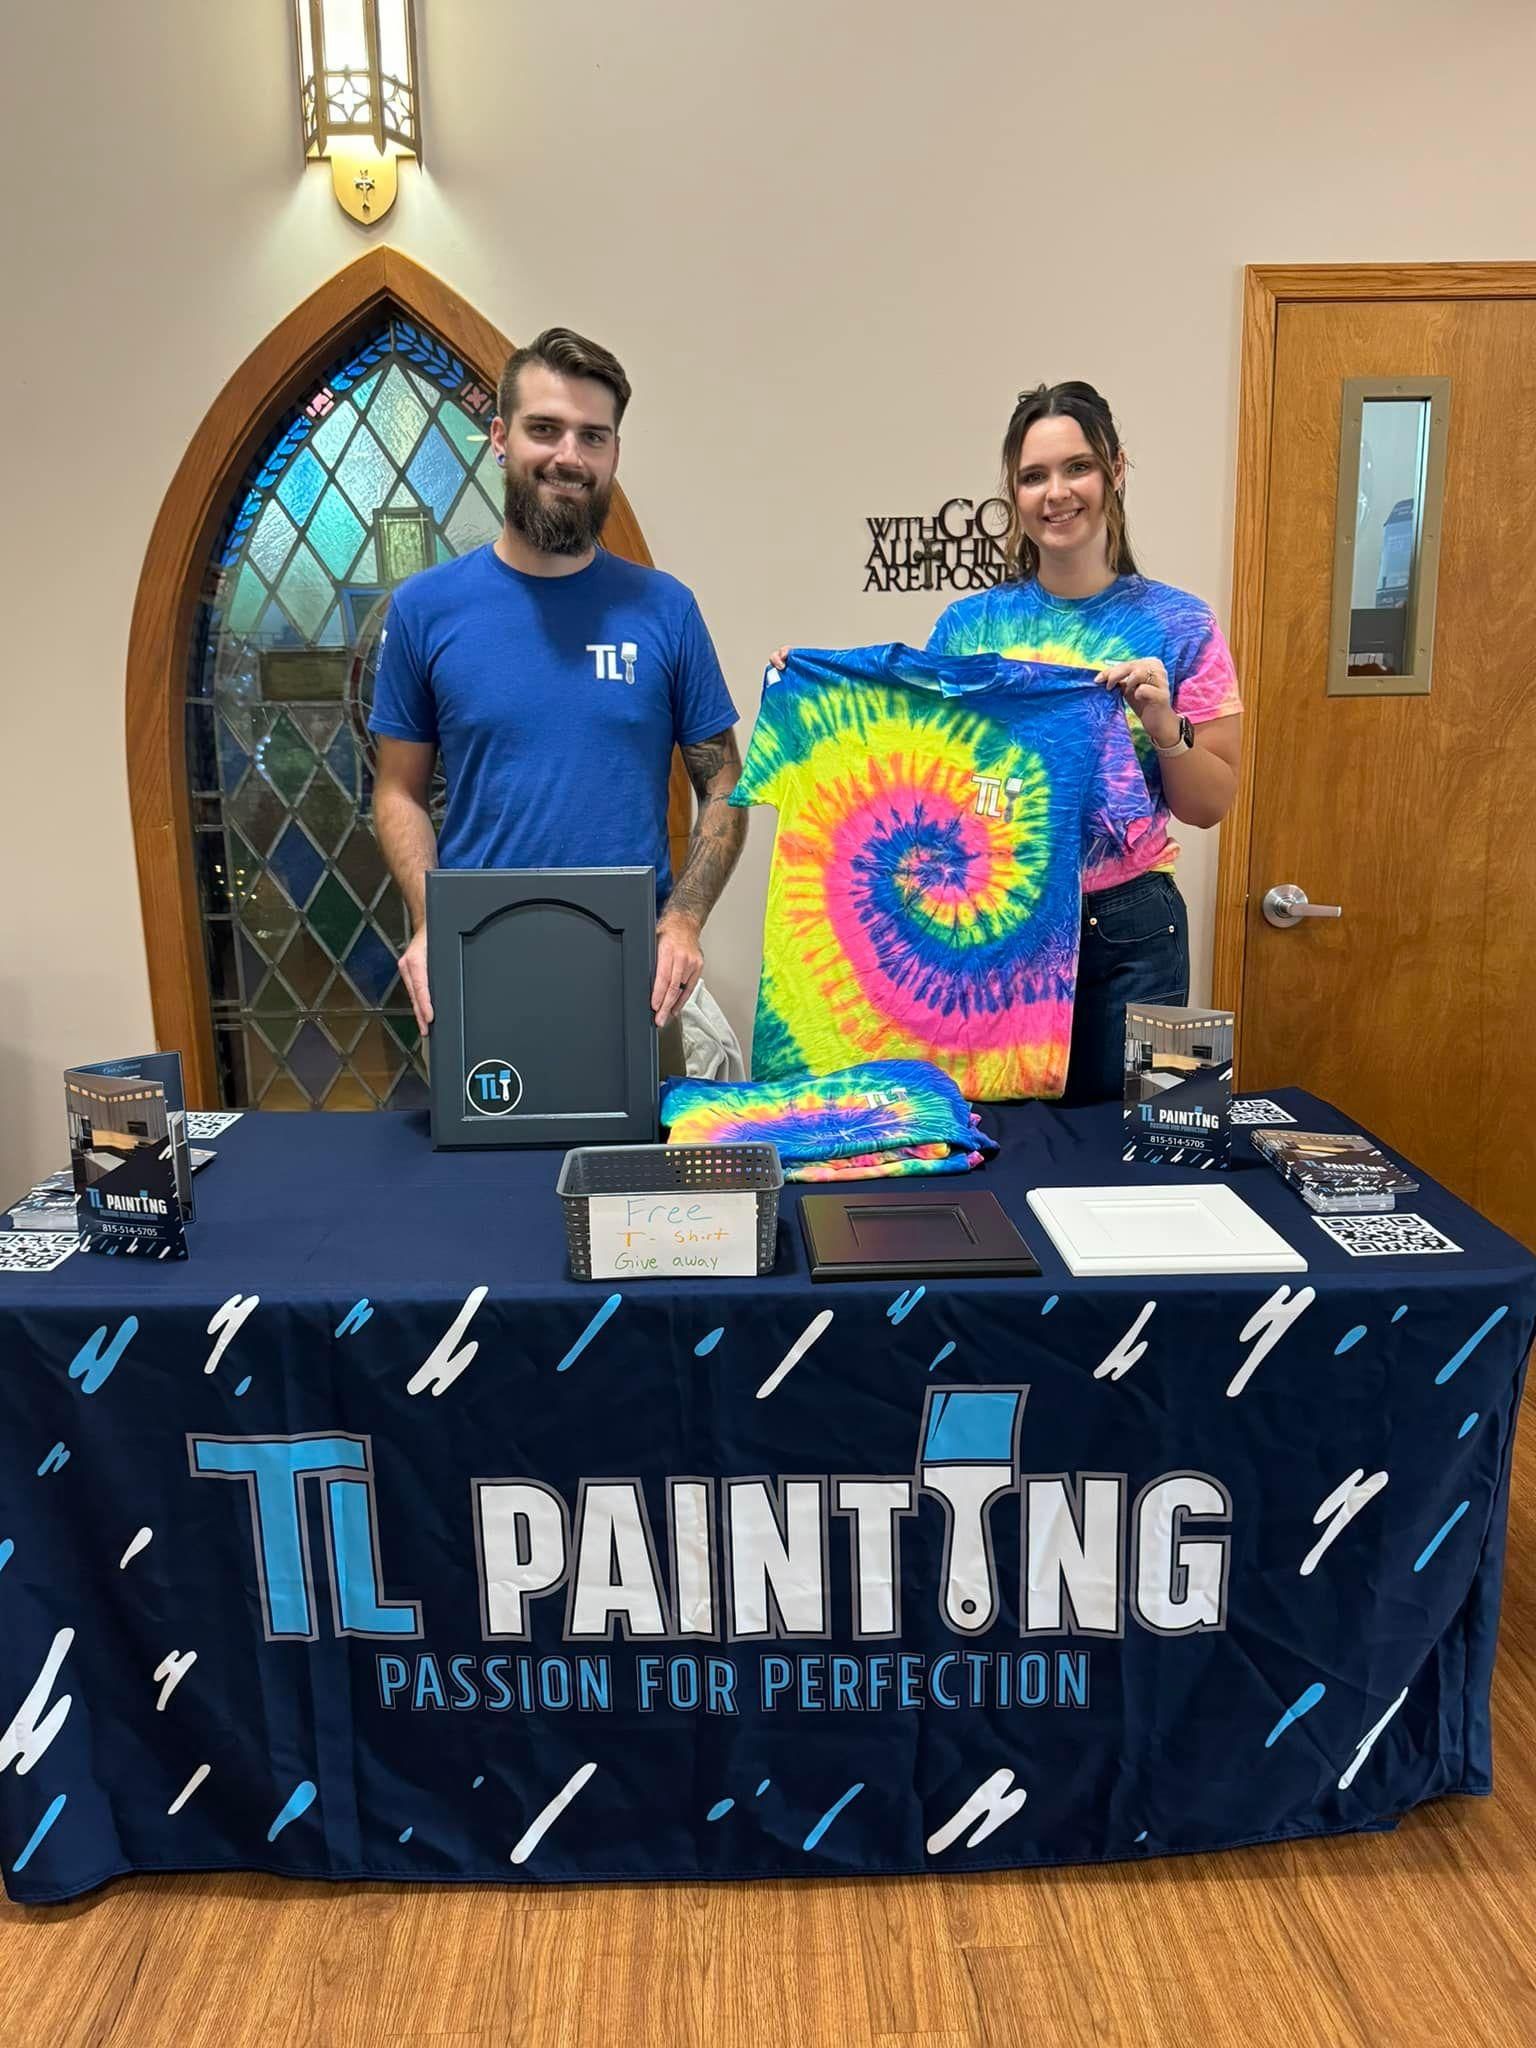 All Photos for TL Painting in Joliet, IL